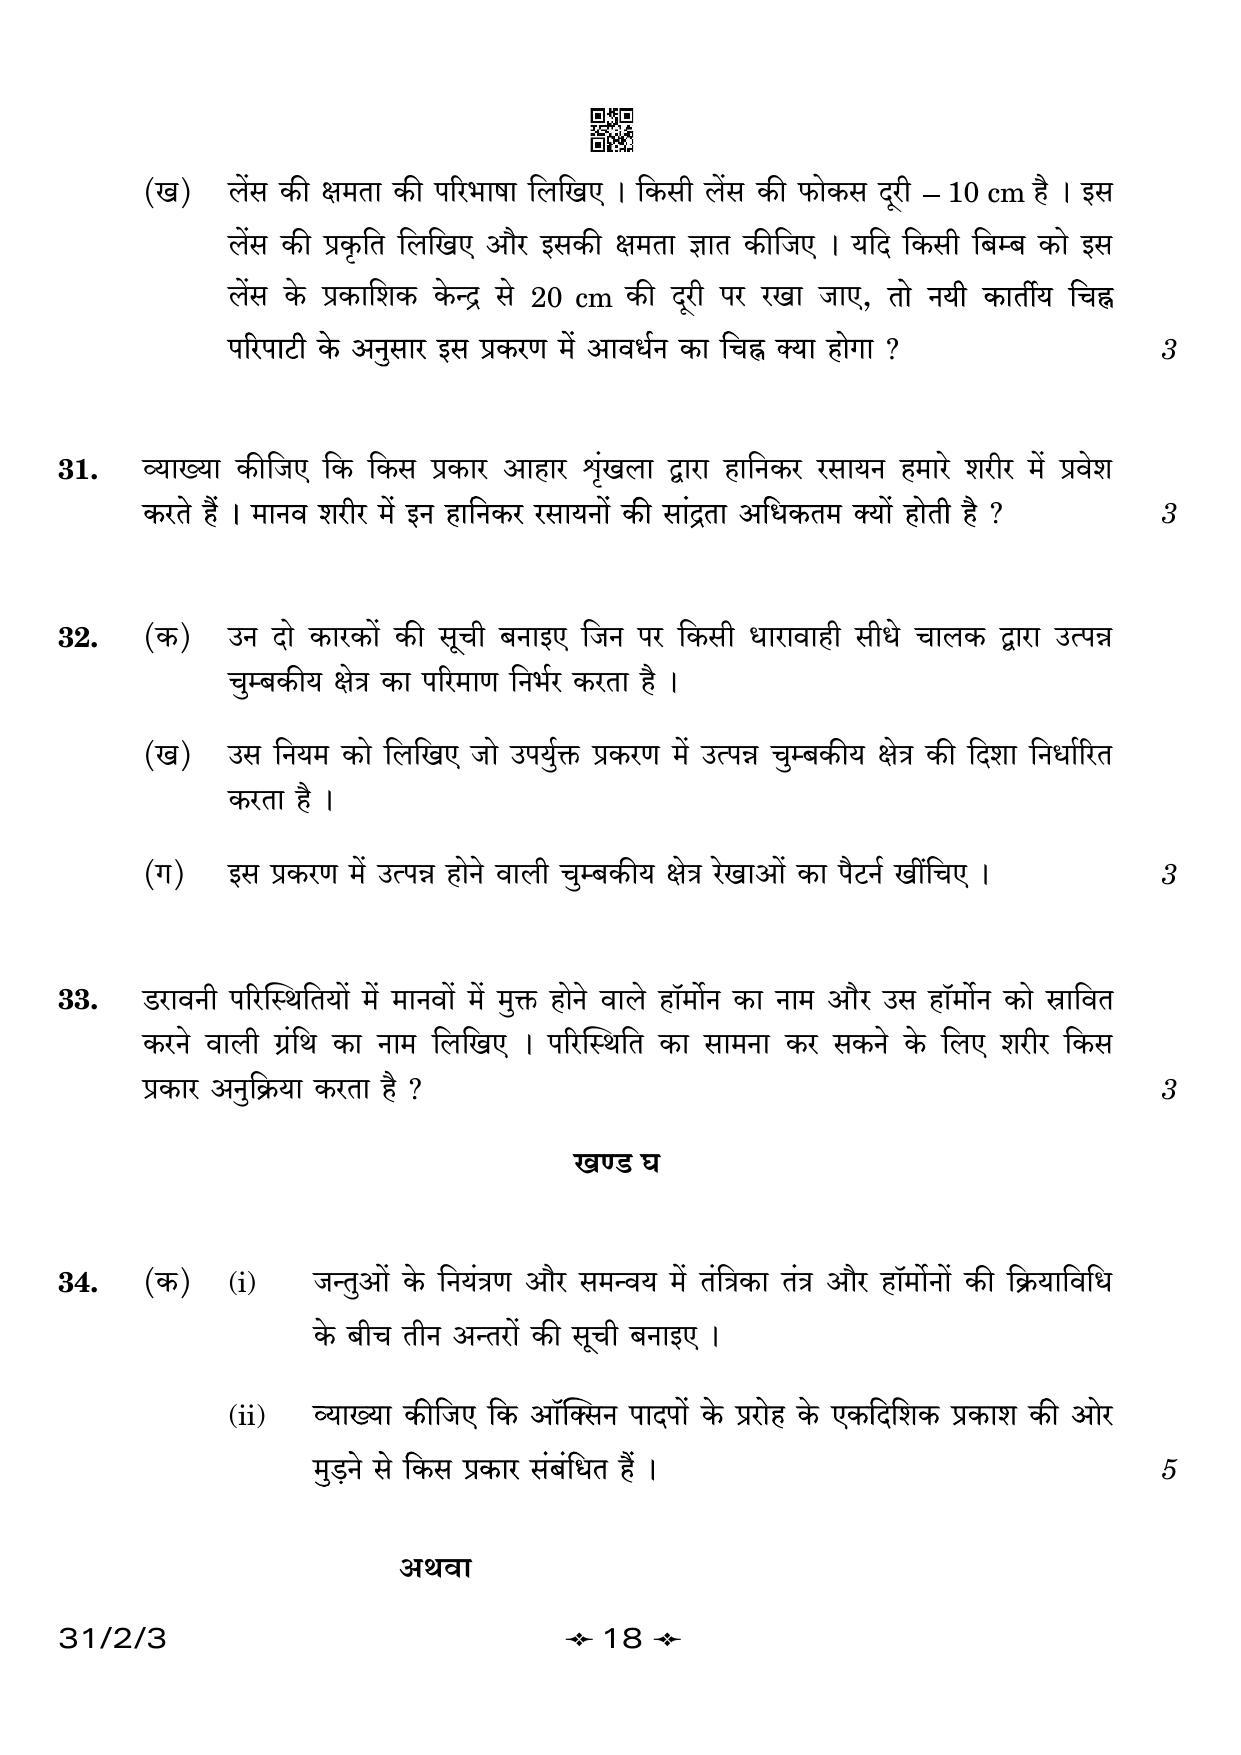 CBSE Class 10 31-2-3 Science 2023 Question Paper - Page 18